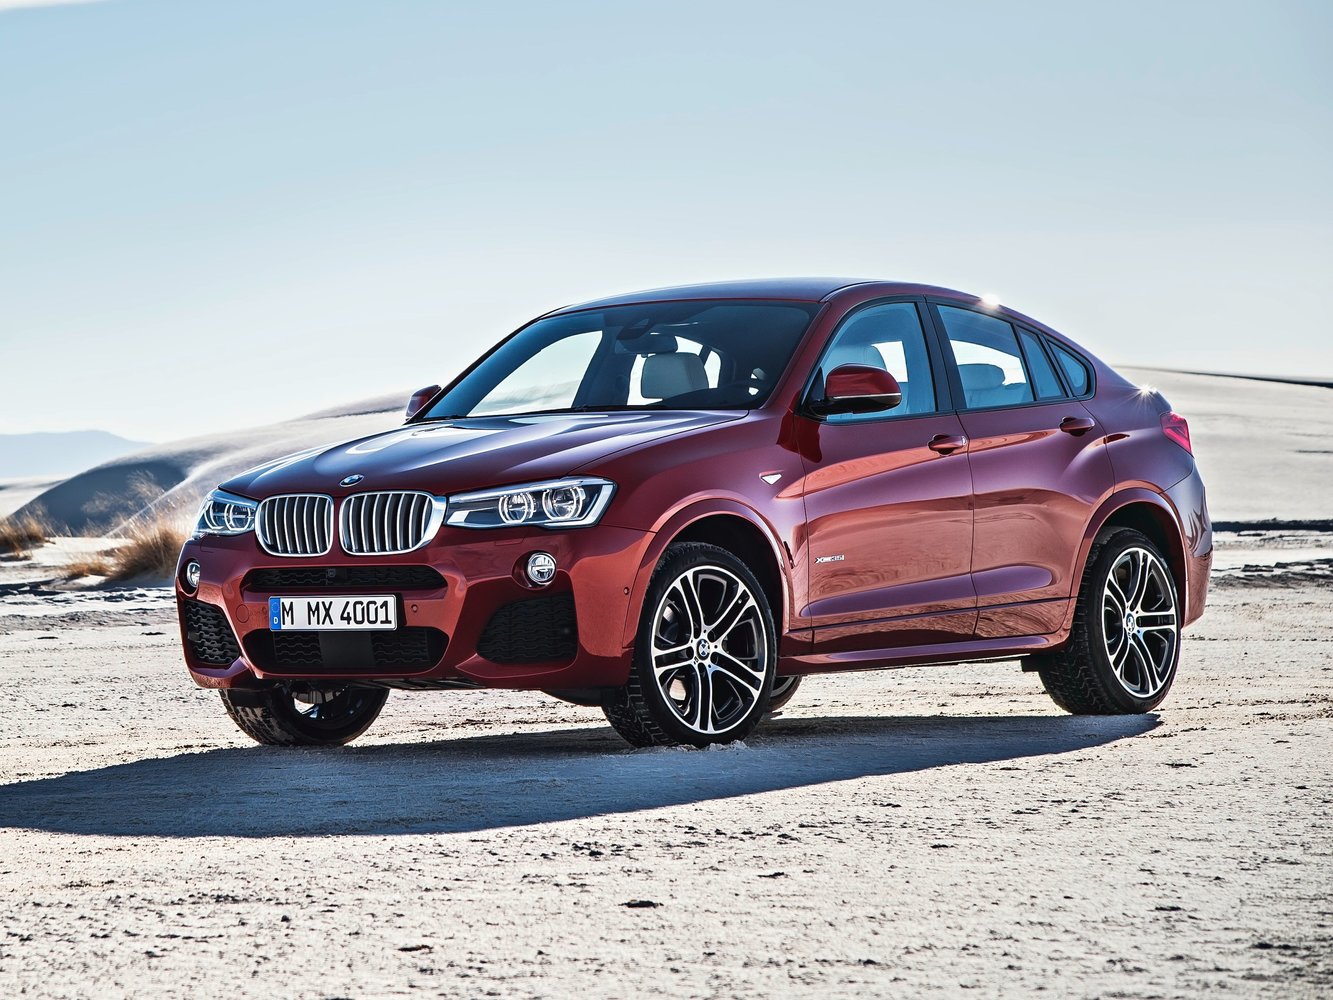 X 4 13x 4 0. BMW x4 f26. BMW x4 GTS. БМВ джип х4. BMW x4 f26 Red.